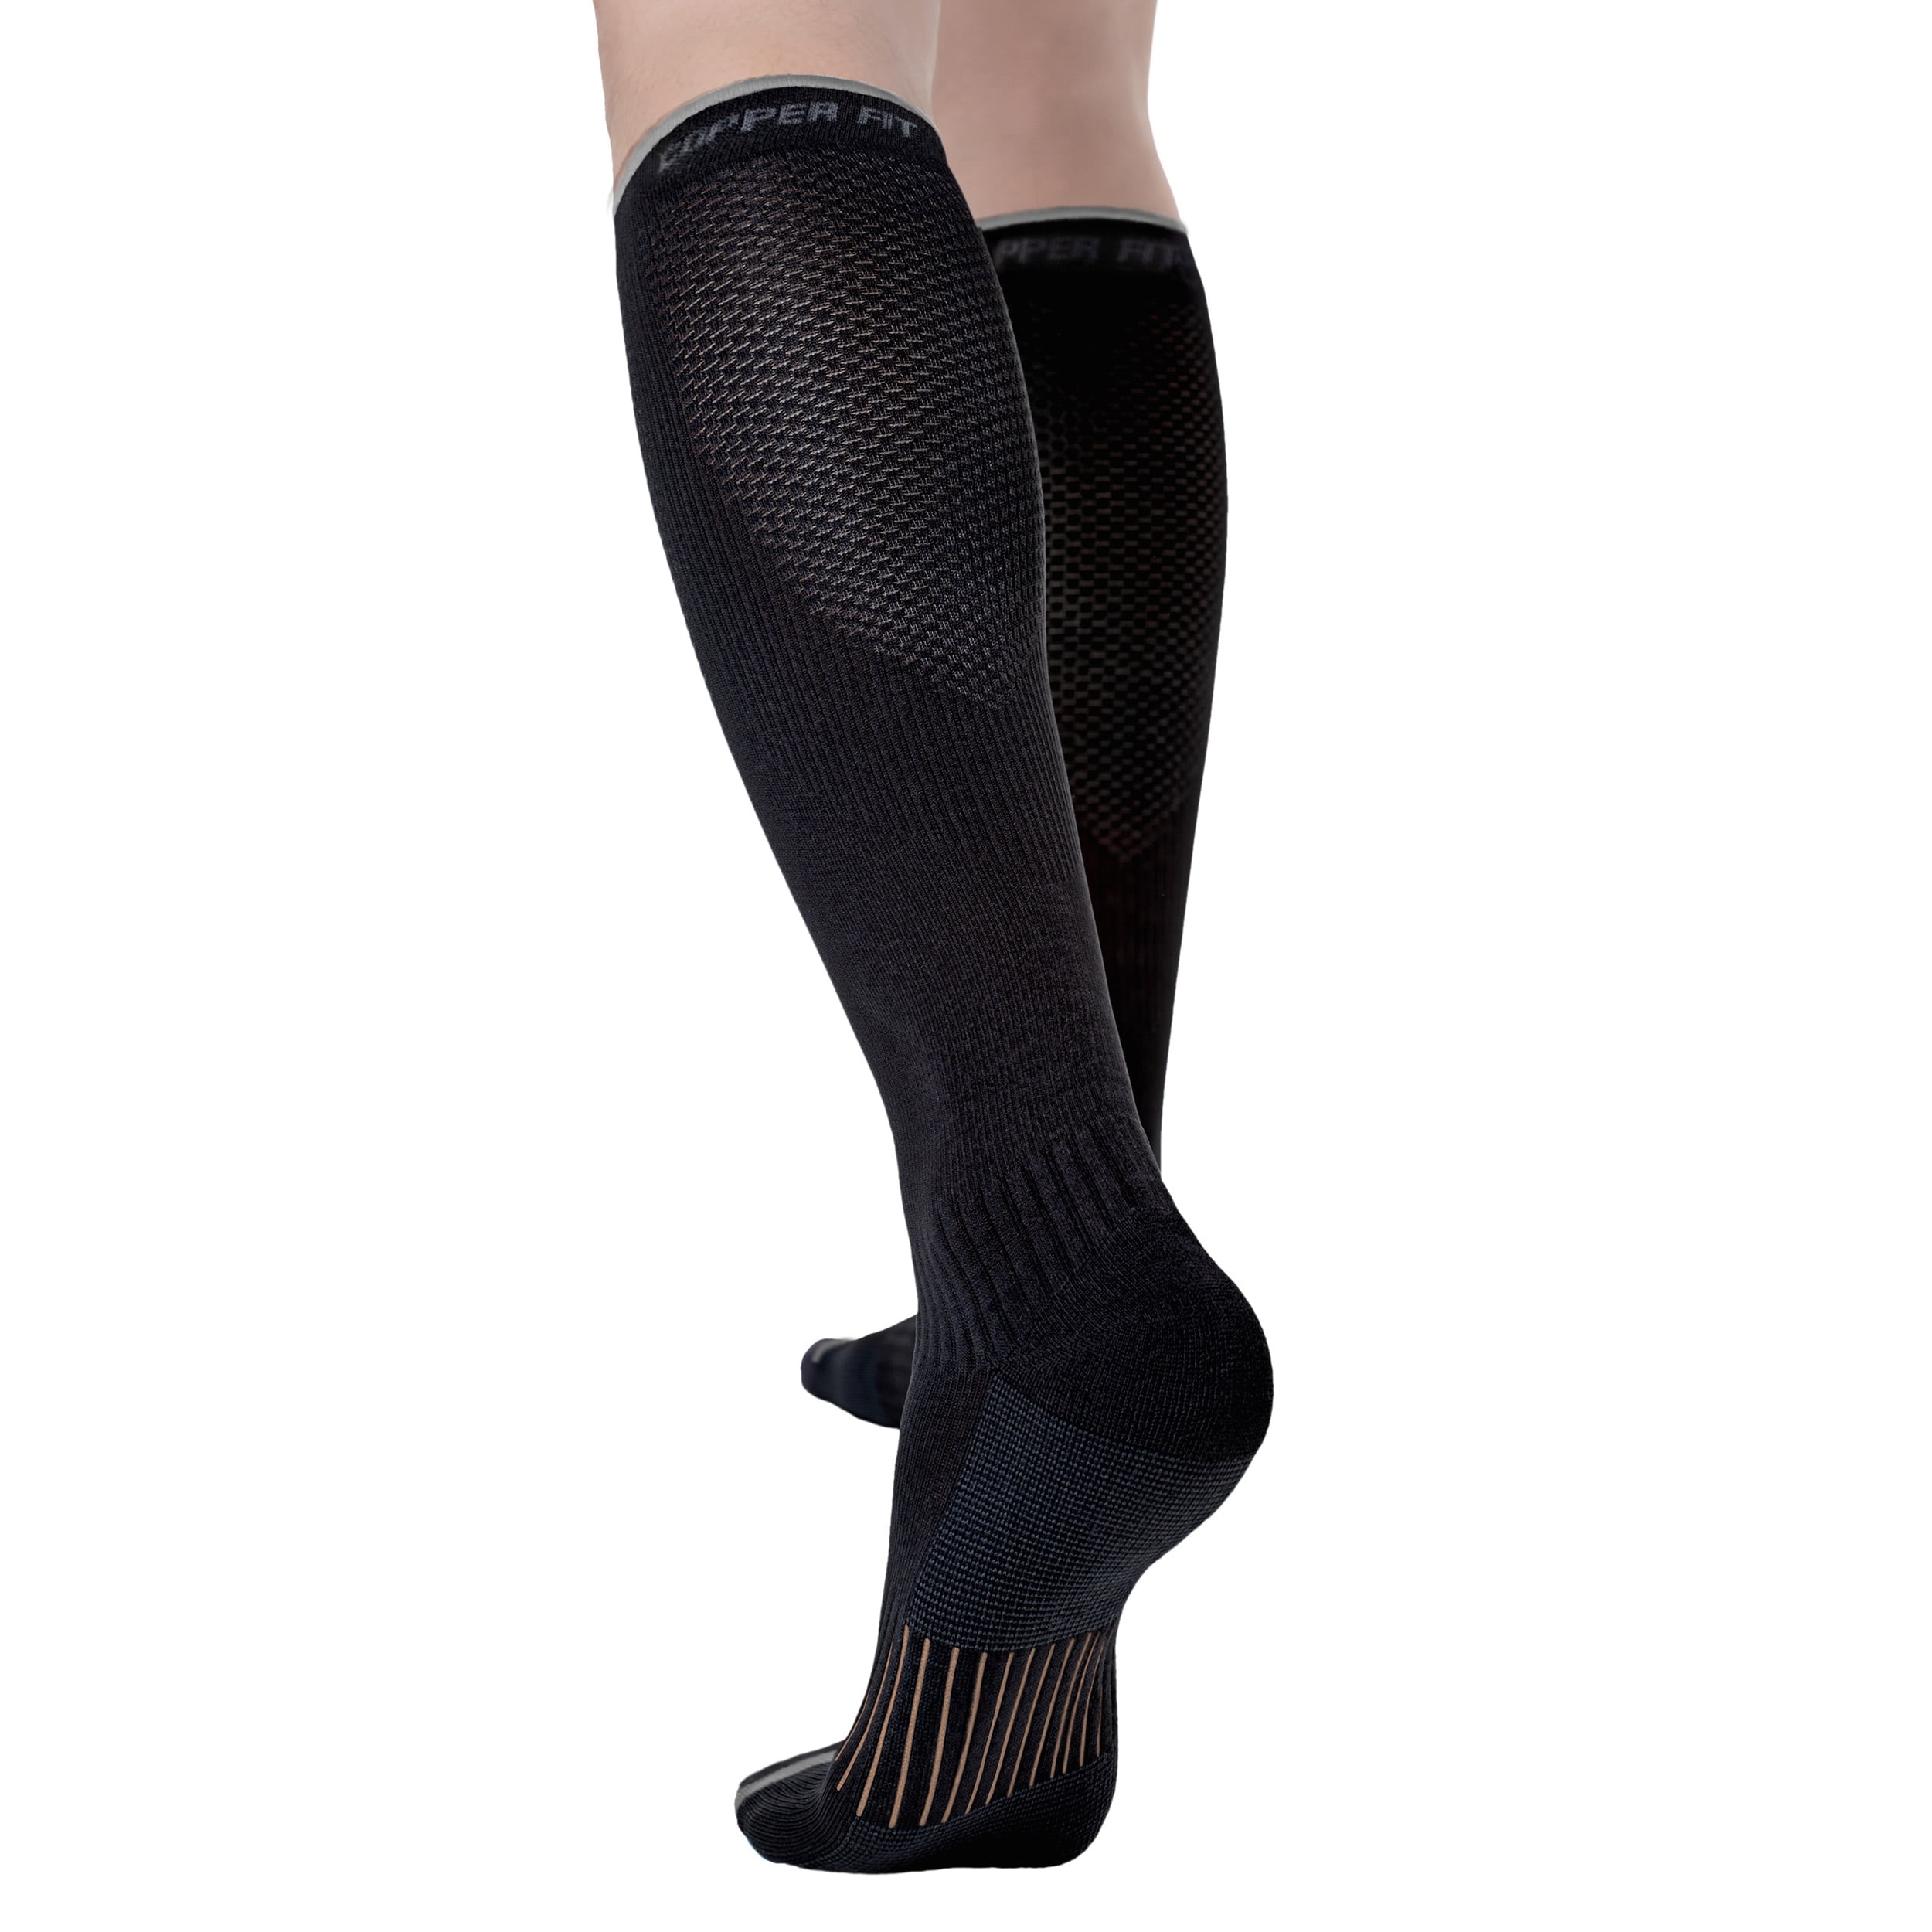 Copper Fit Energy Unisex Easy-On/Easy-Off Knee Compression Socks, Black, S/M, 1 Pair